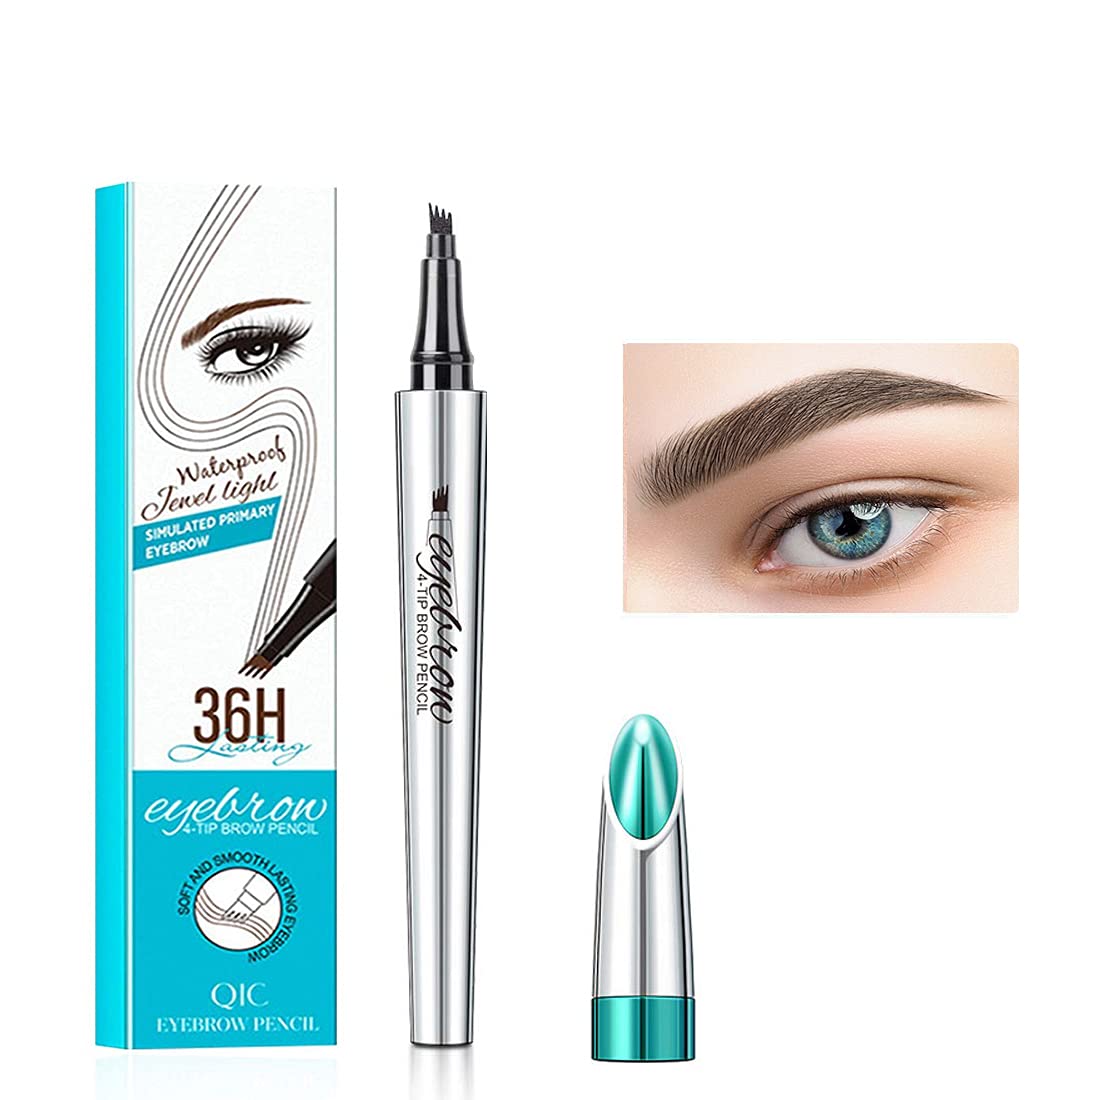 CUIFULI Eyebrow Pencil, 4 Point Tips Eyebrow Makeup with Micro Fork Tip Applicator, Durable Water and Smudge-proof Eyebrow Pencil, Dark Brown, ‎dark